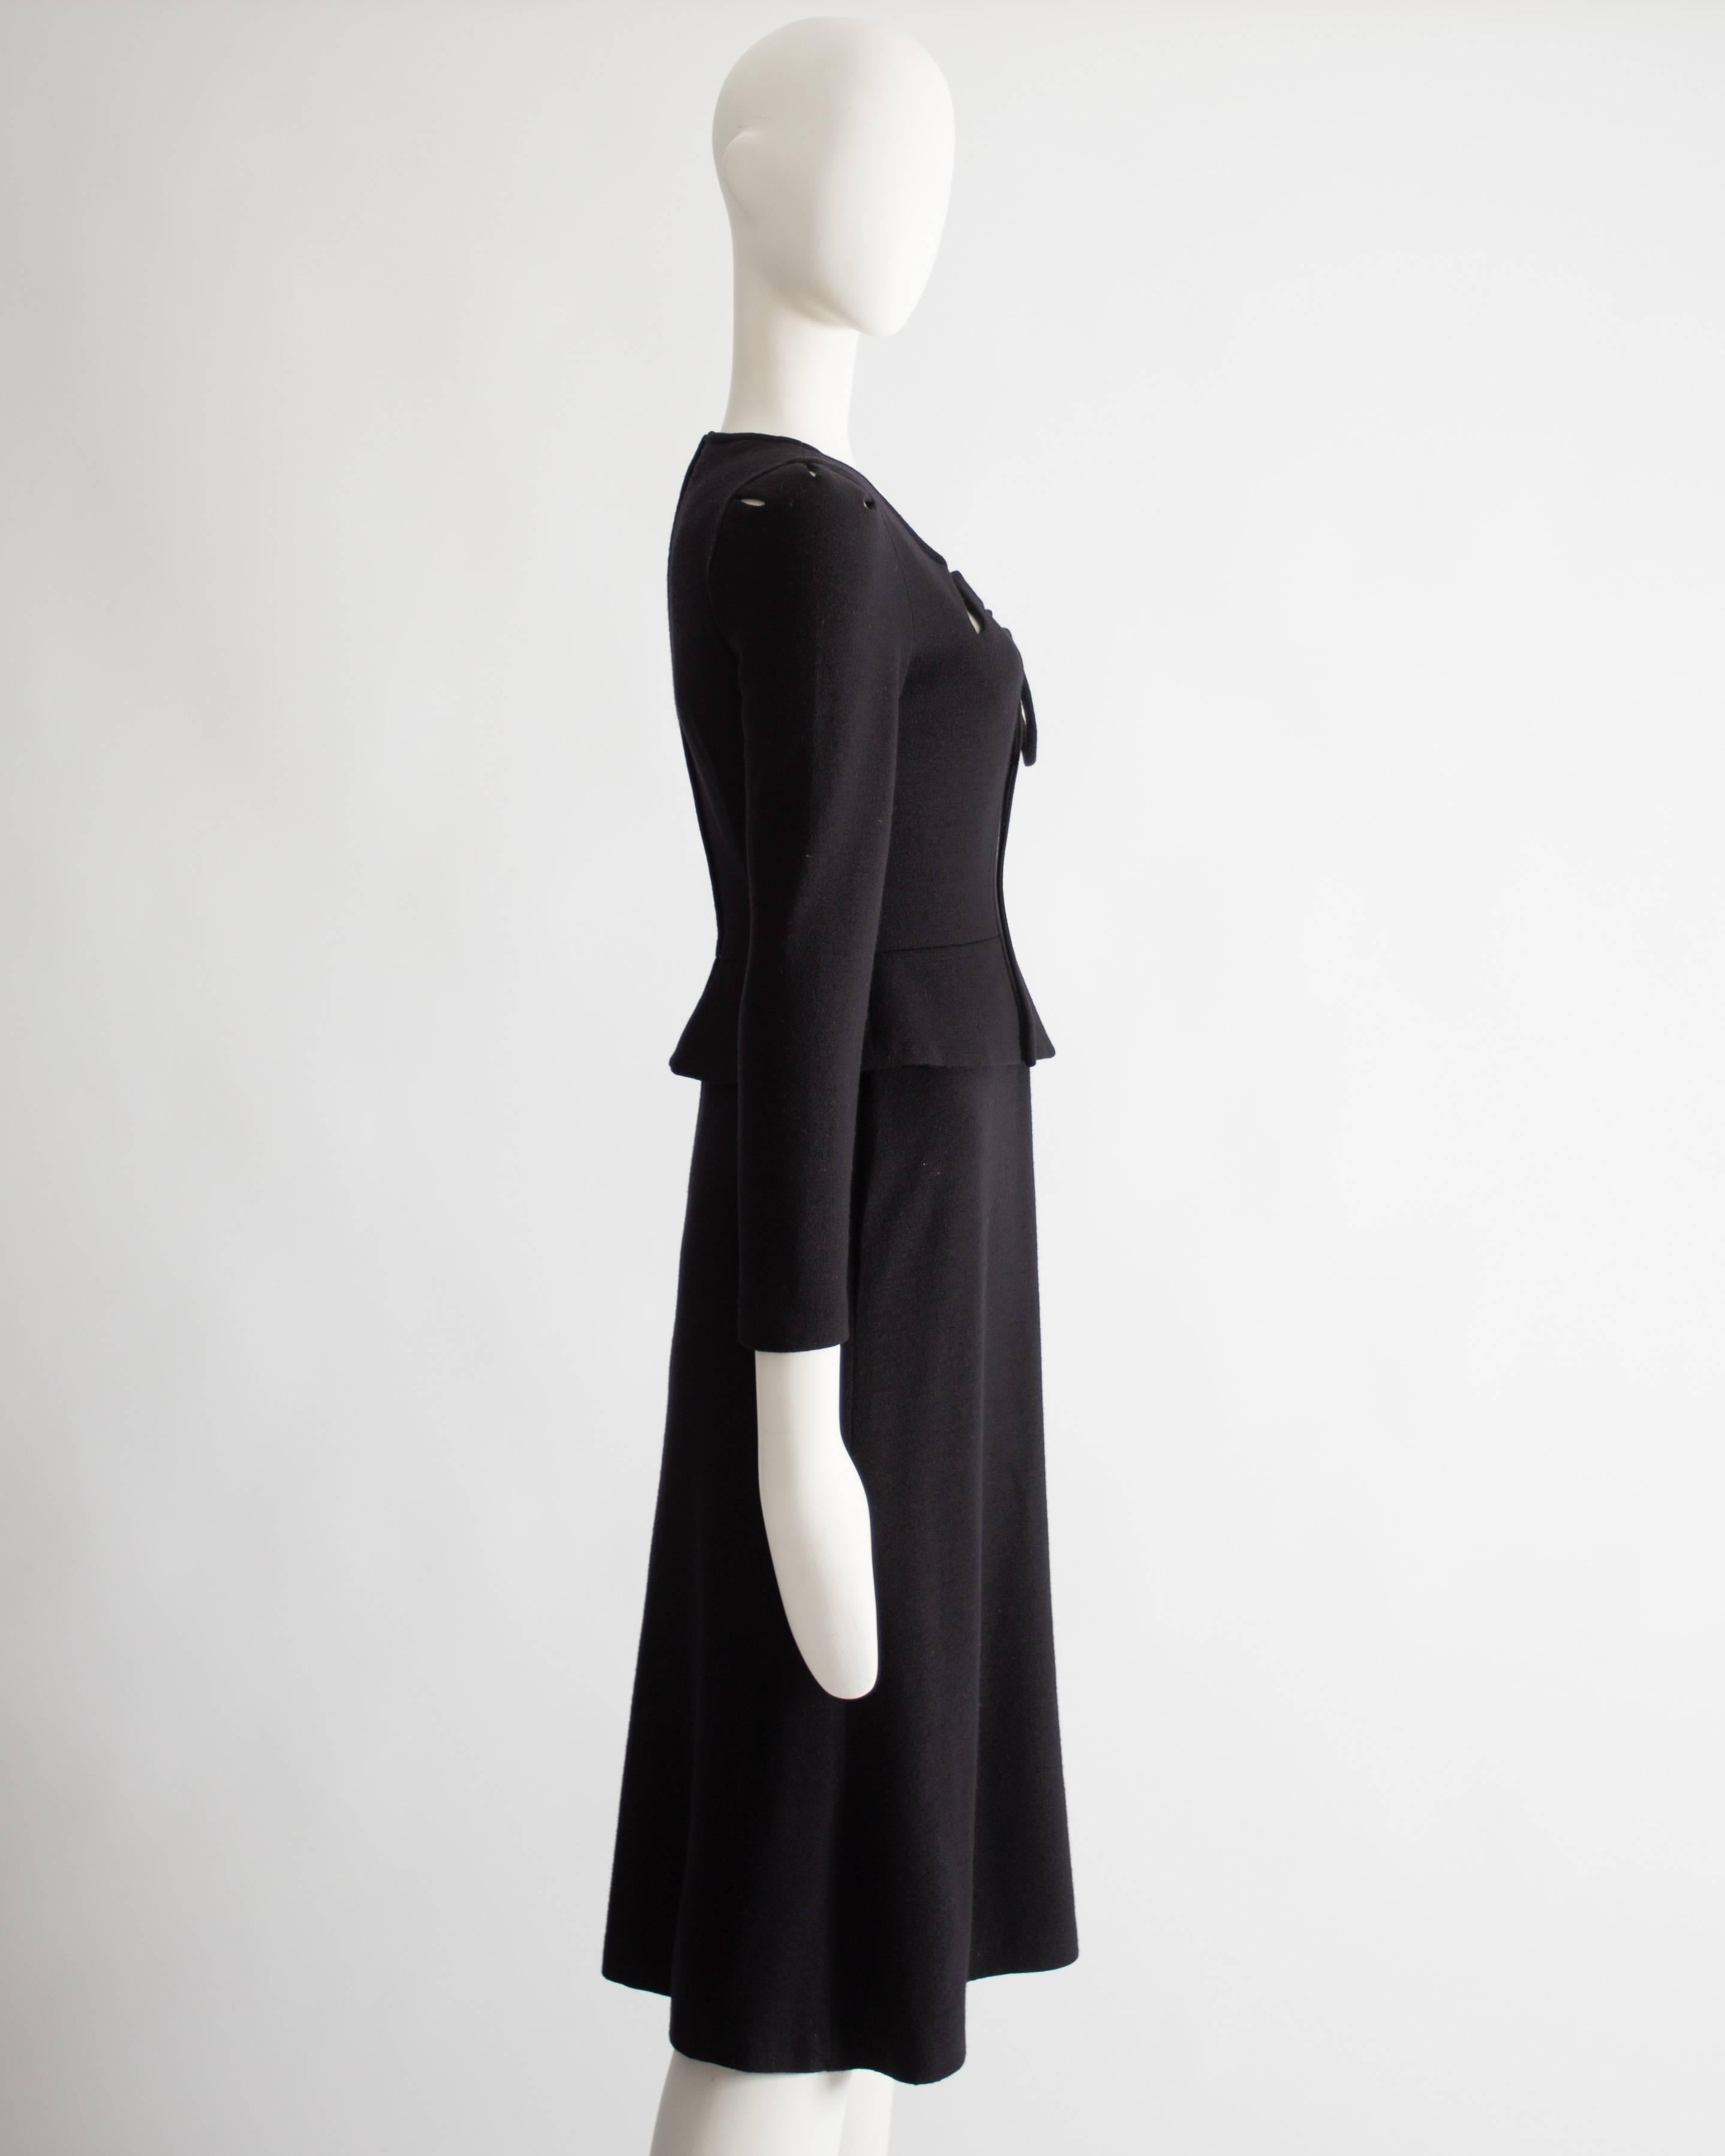 Women's Ossie Clark black wool mid-length dress with cut-outs, Circa 1973